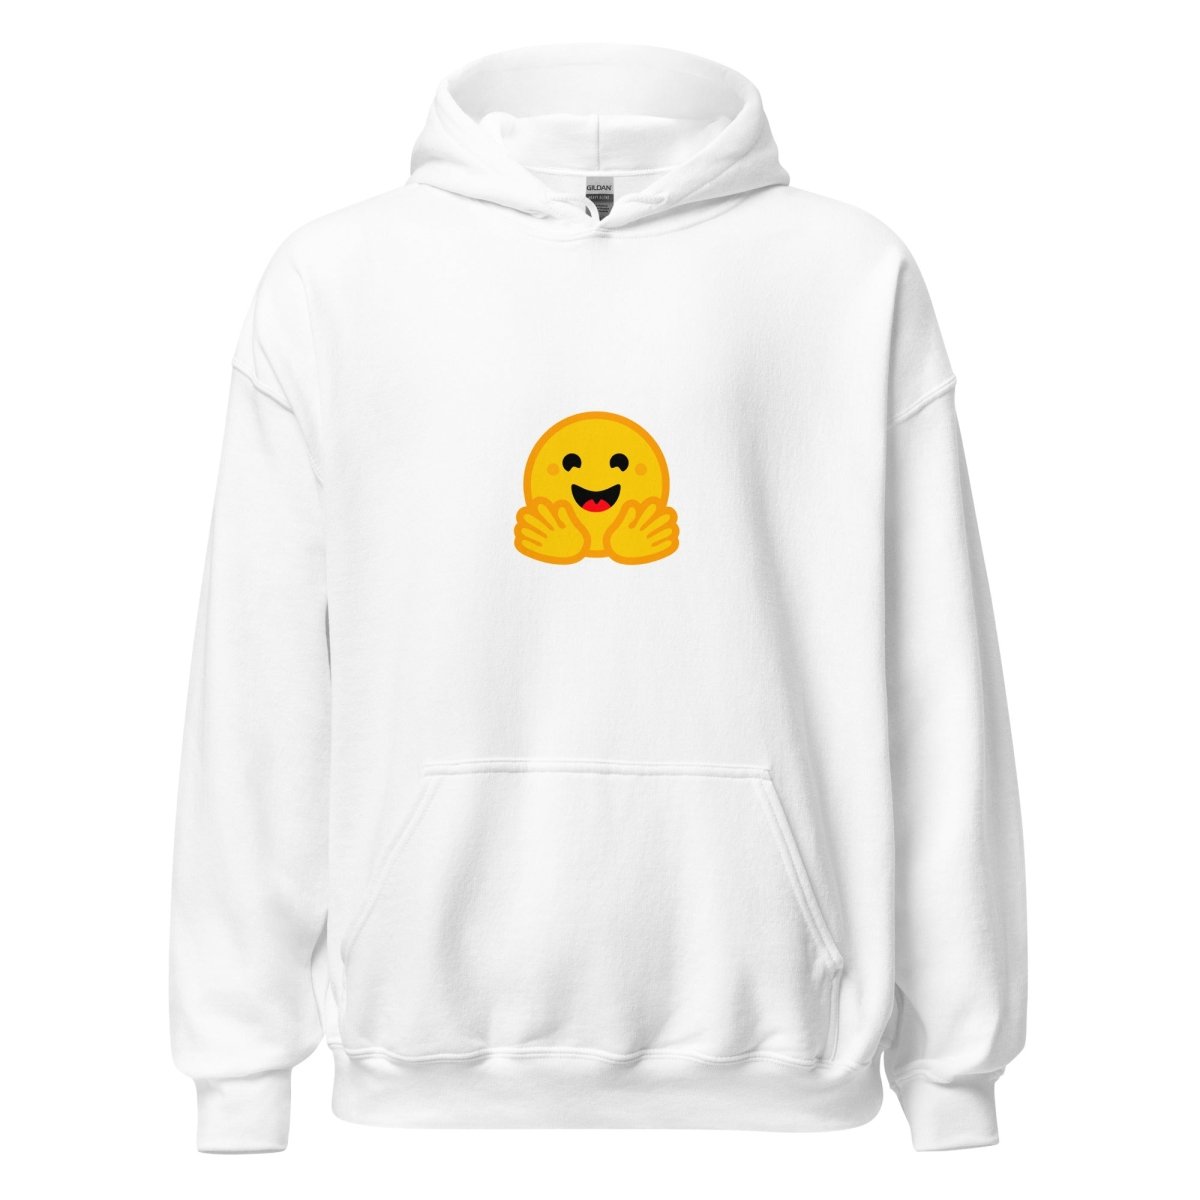 Hugging Face Small Icon Hoodie - White - AI Store